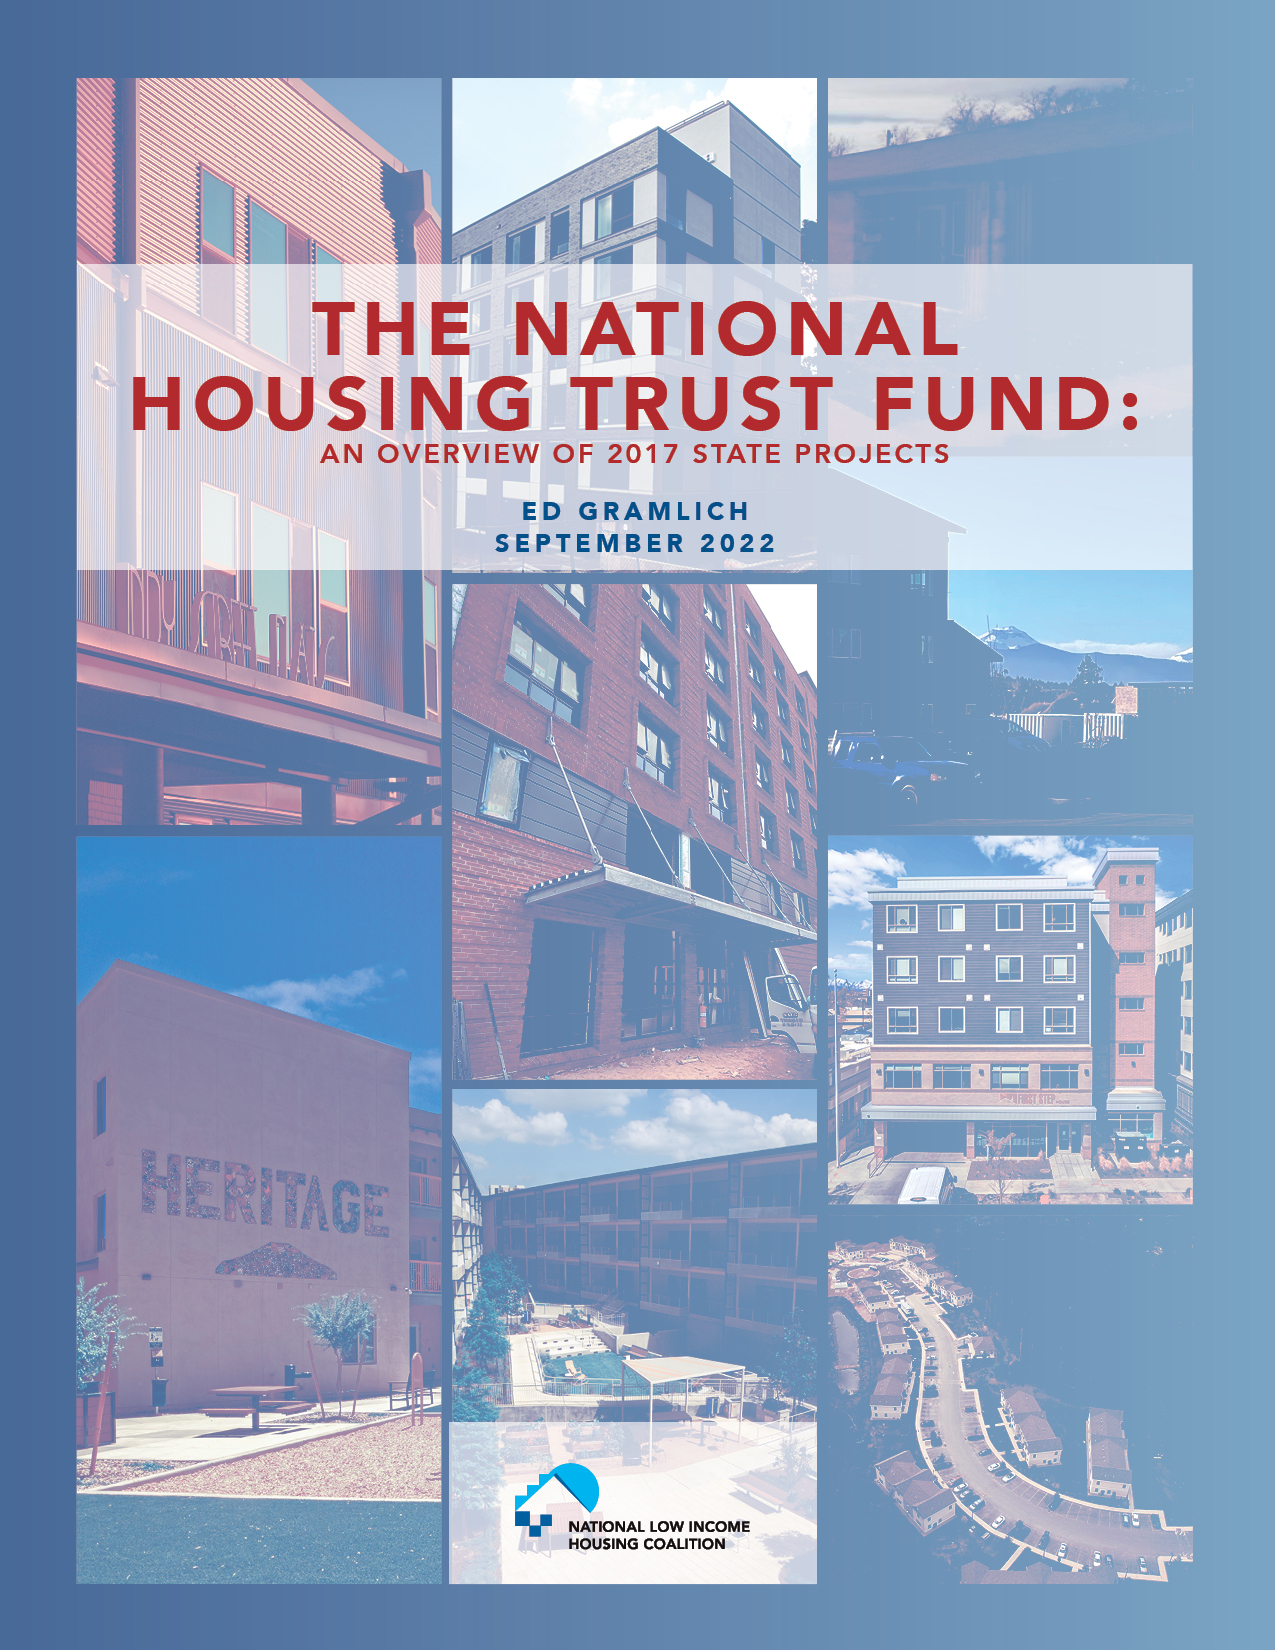 The National Housing Trust Fund: An Overview of 2017 State Projects 